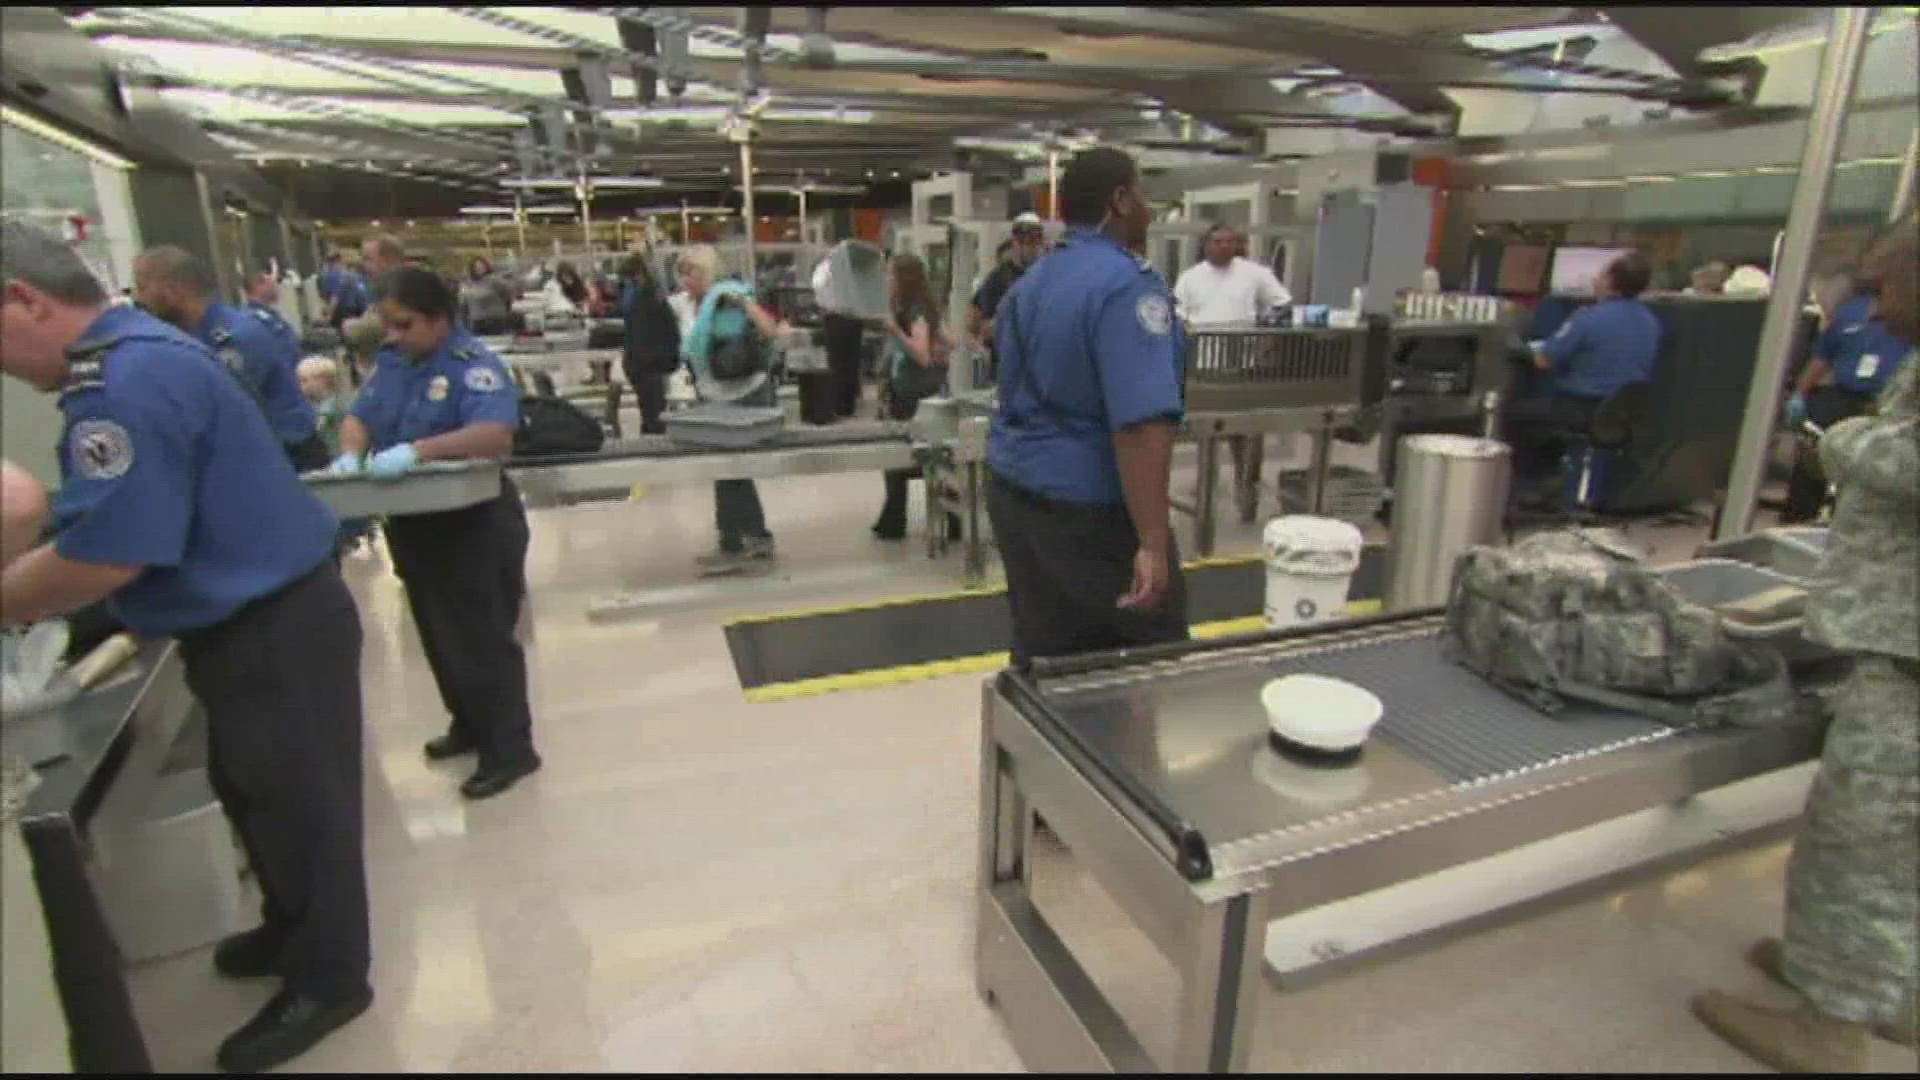 Viewer Shawn Ayers said she's seen inconsistencies at TSA checkpoints and wants to know what's required.